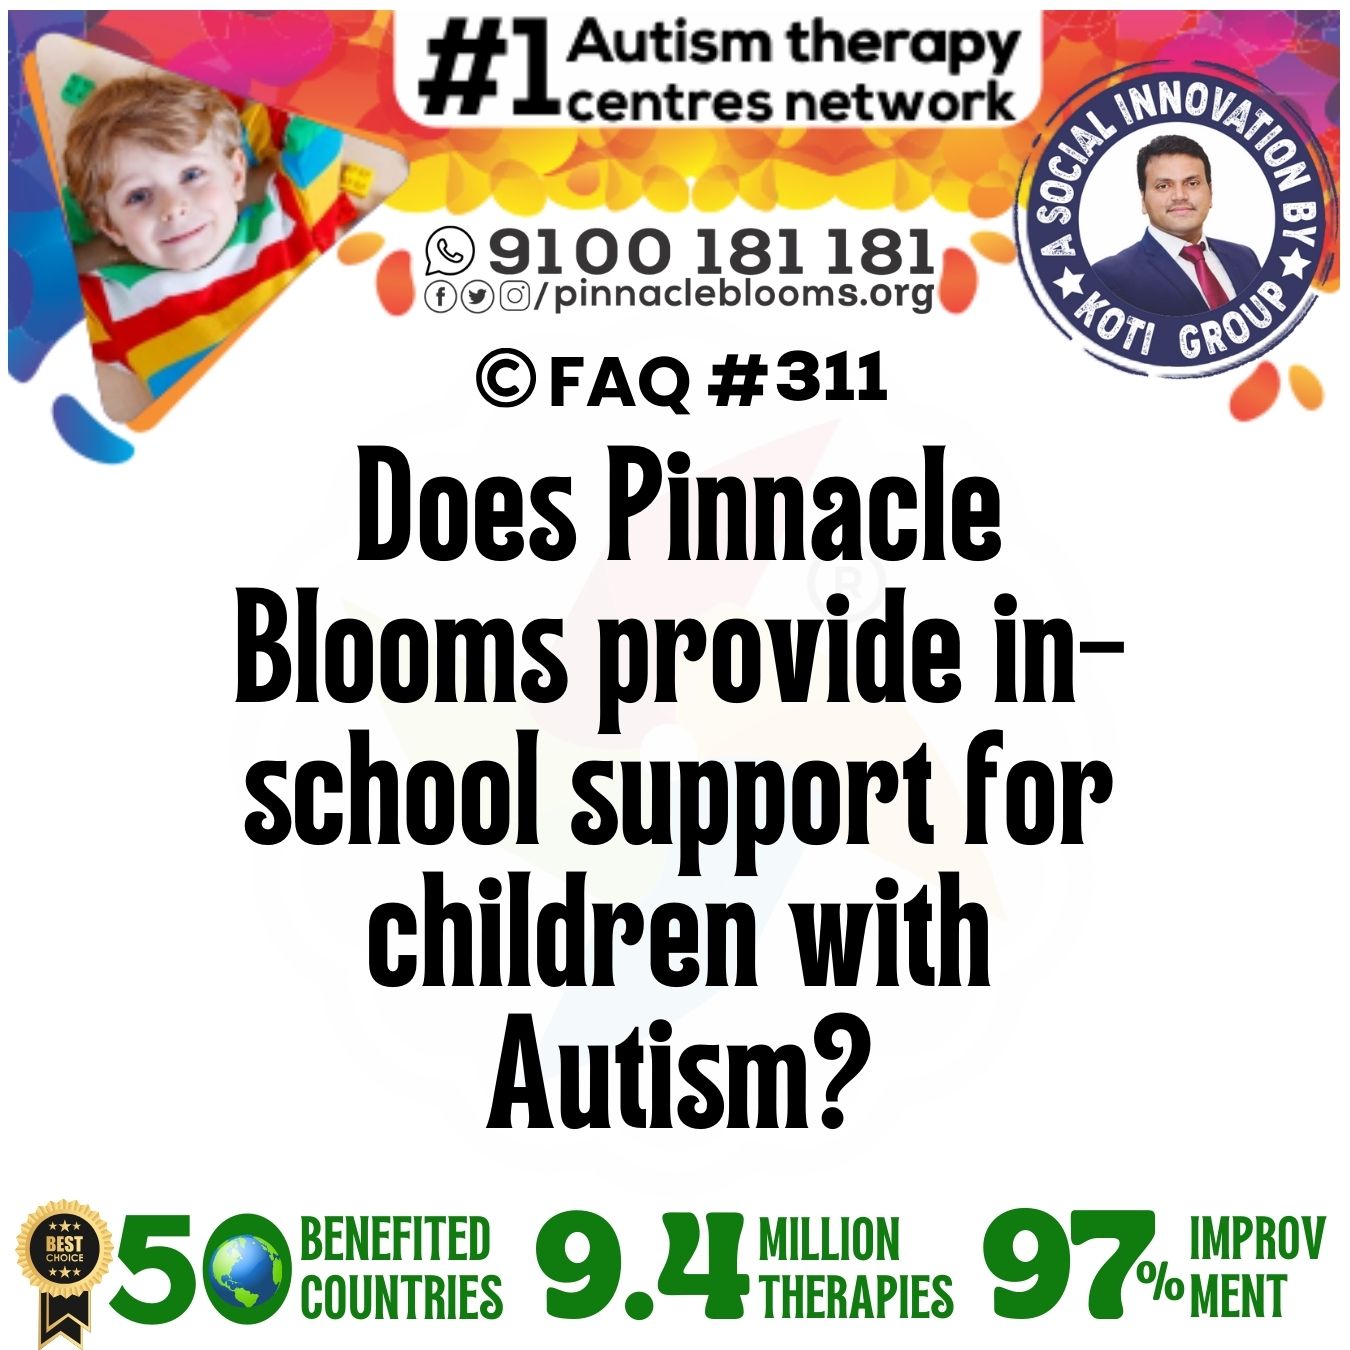 Does Pinnacle Blooms provide in-school support for children with Autism?